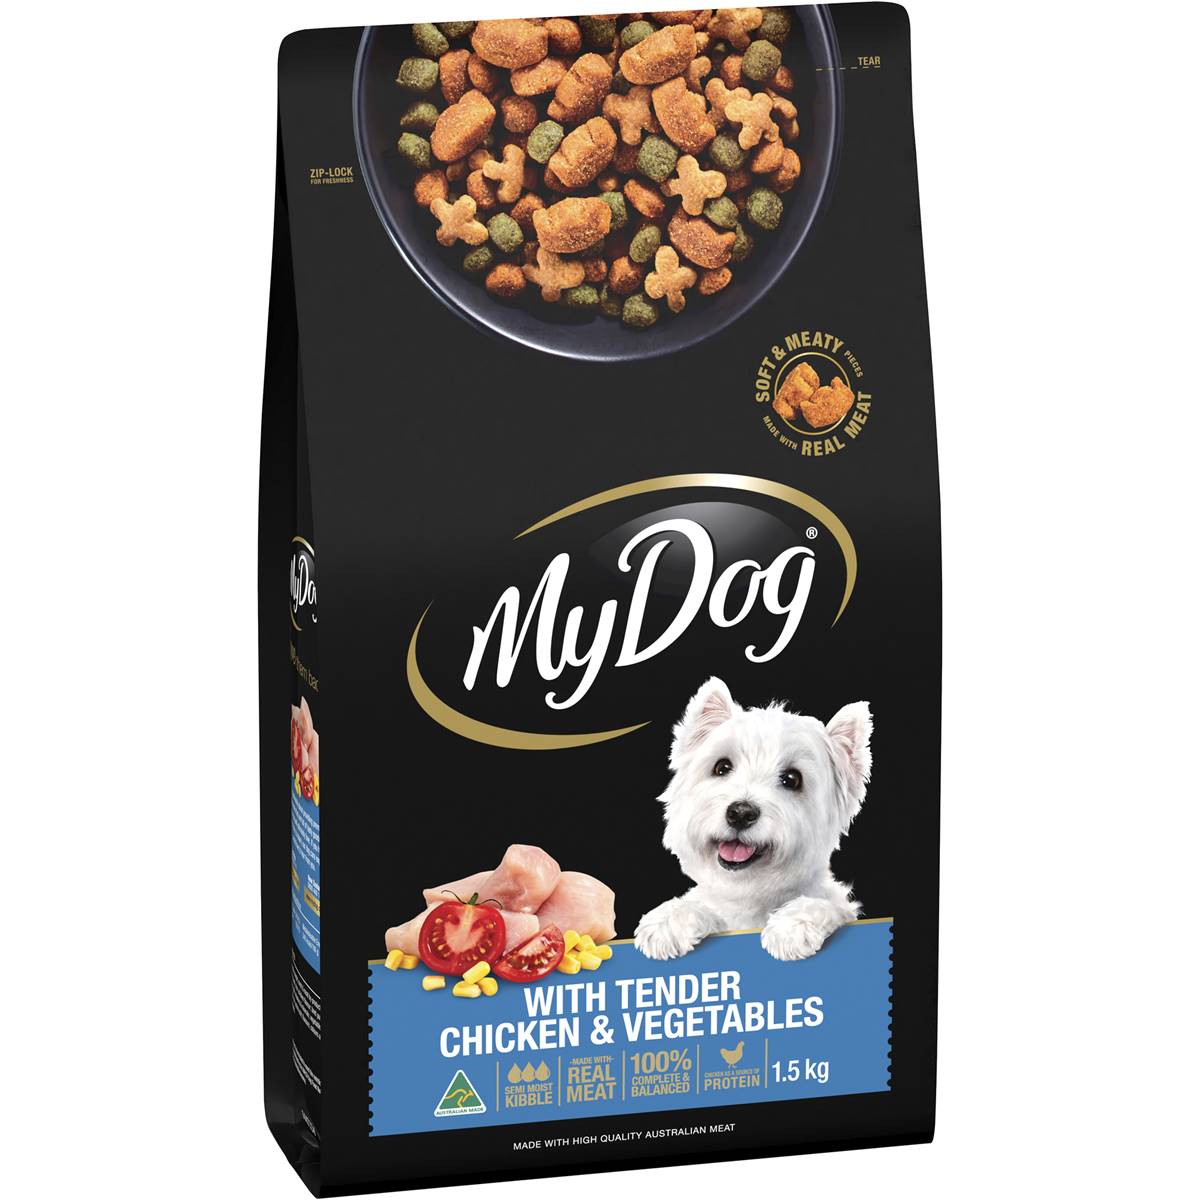 My Dog Roast Chicken Flavour Veges Cheddar & Bacon Dry Food 1.5kg